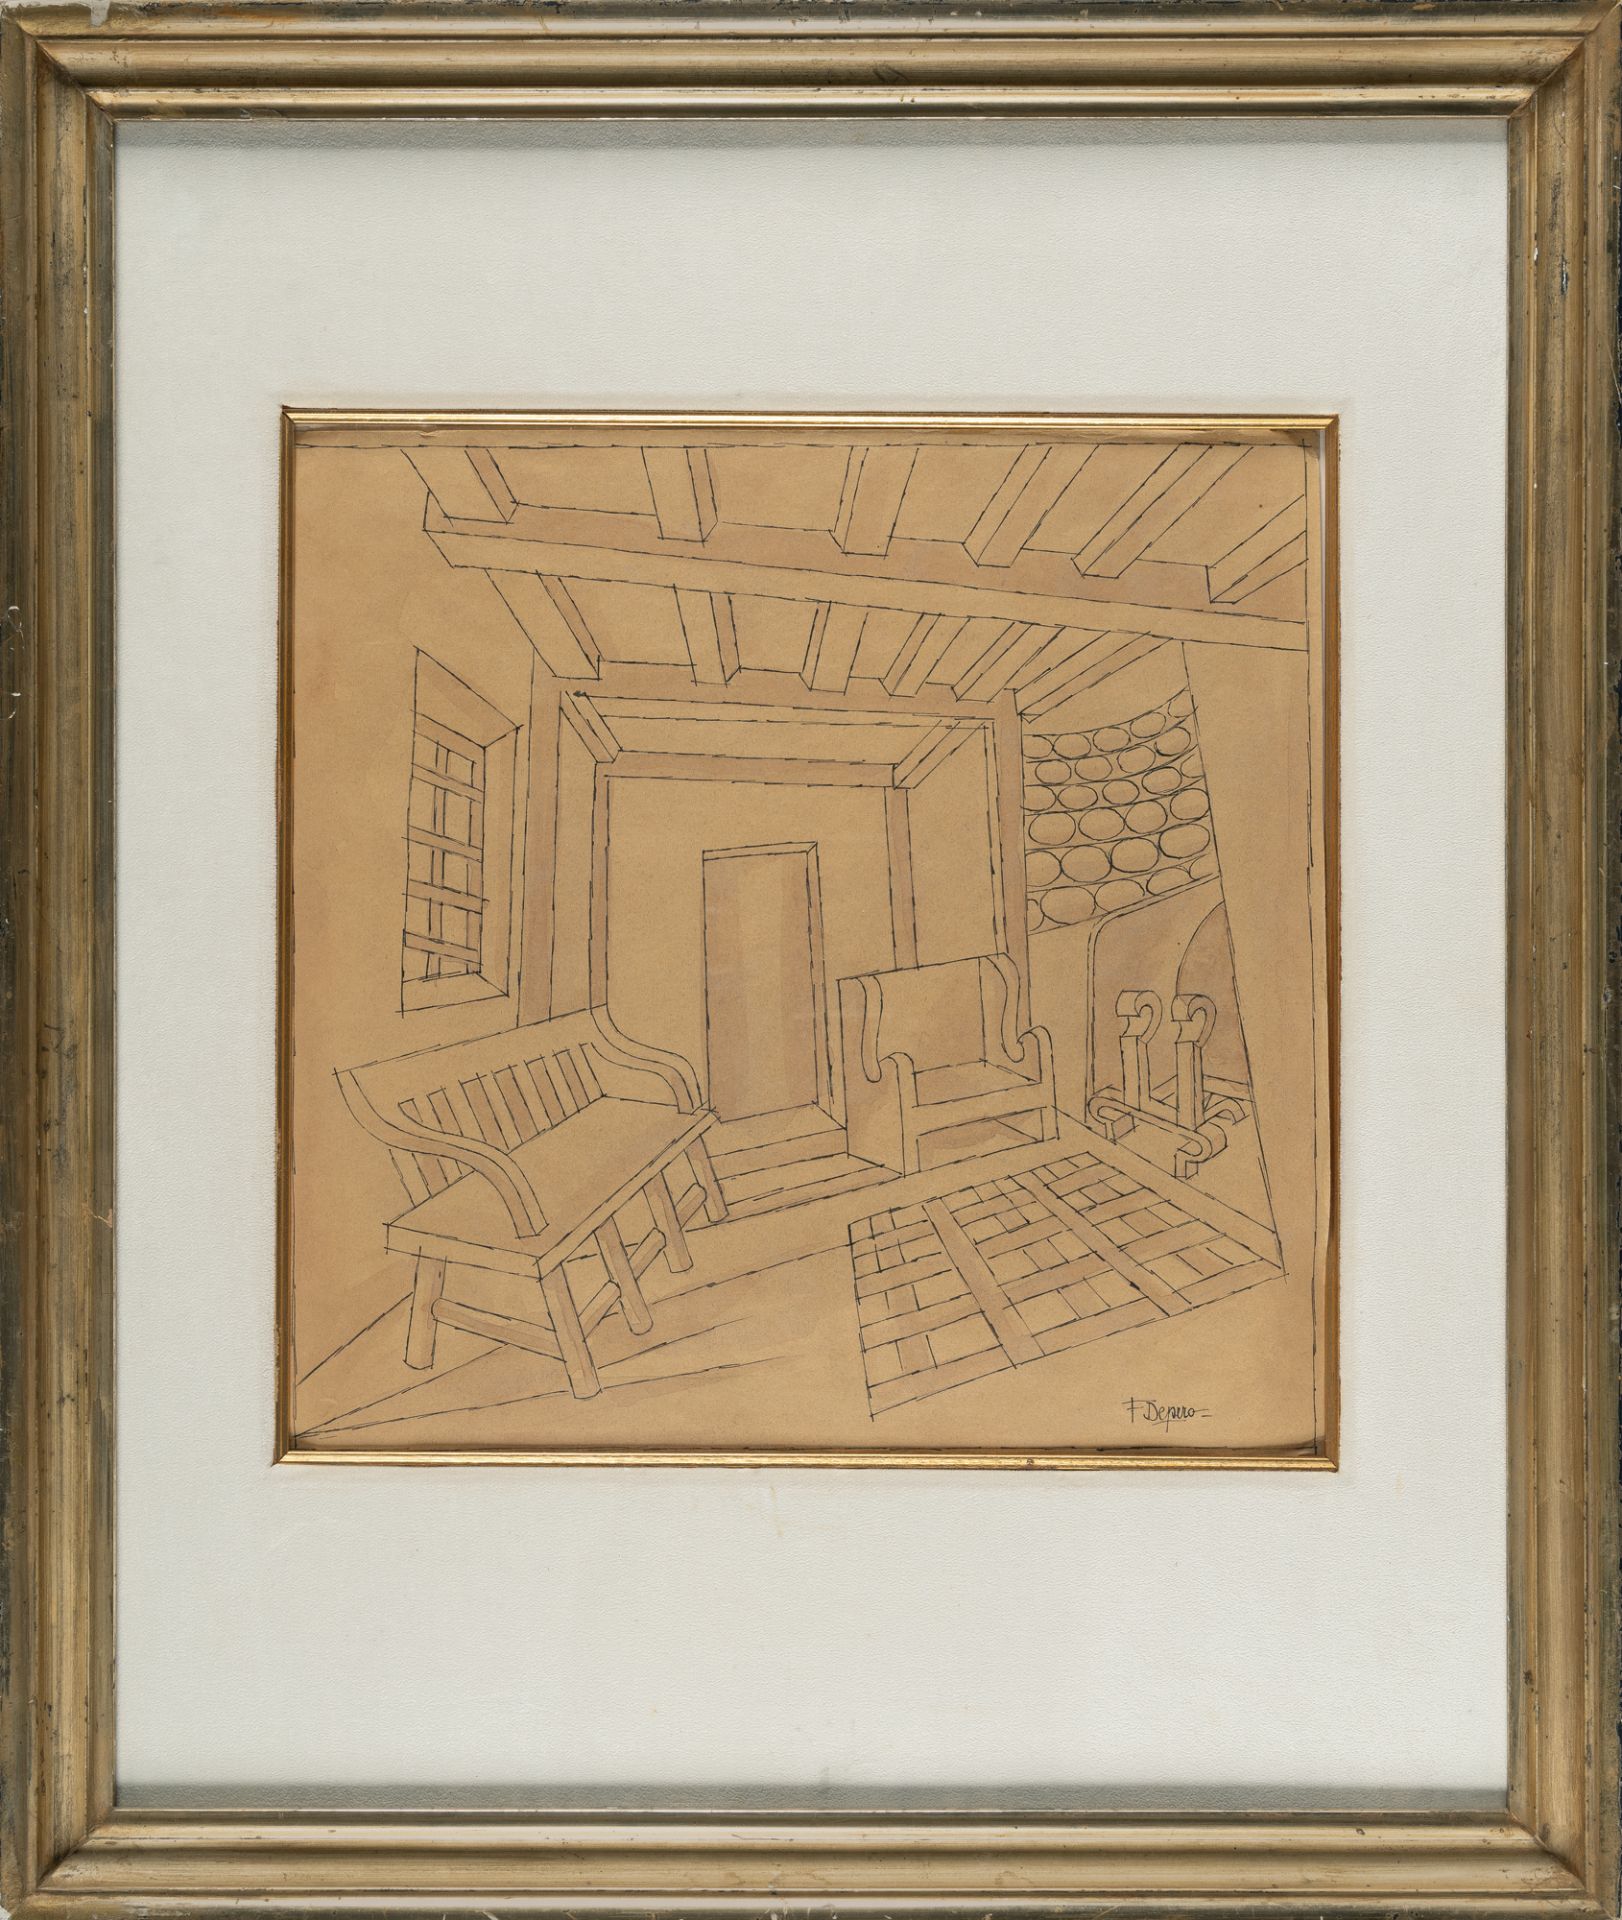 Fortunato Depero, Interno.Indian ink and watercolour on brownish wove. (Ca. 1940). Ca. 34 x 34 cm. - Image 4 of 5